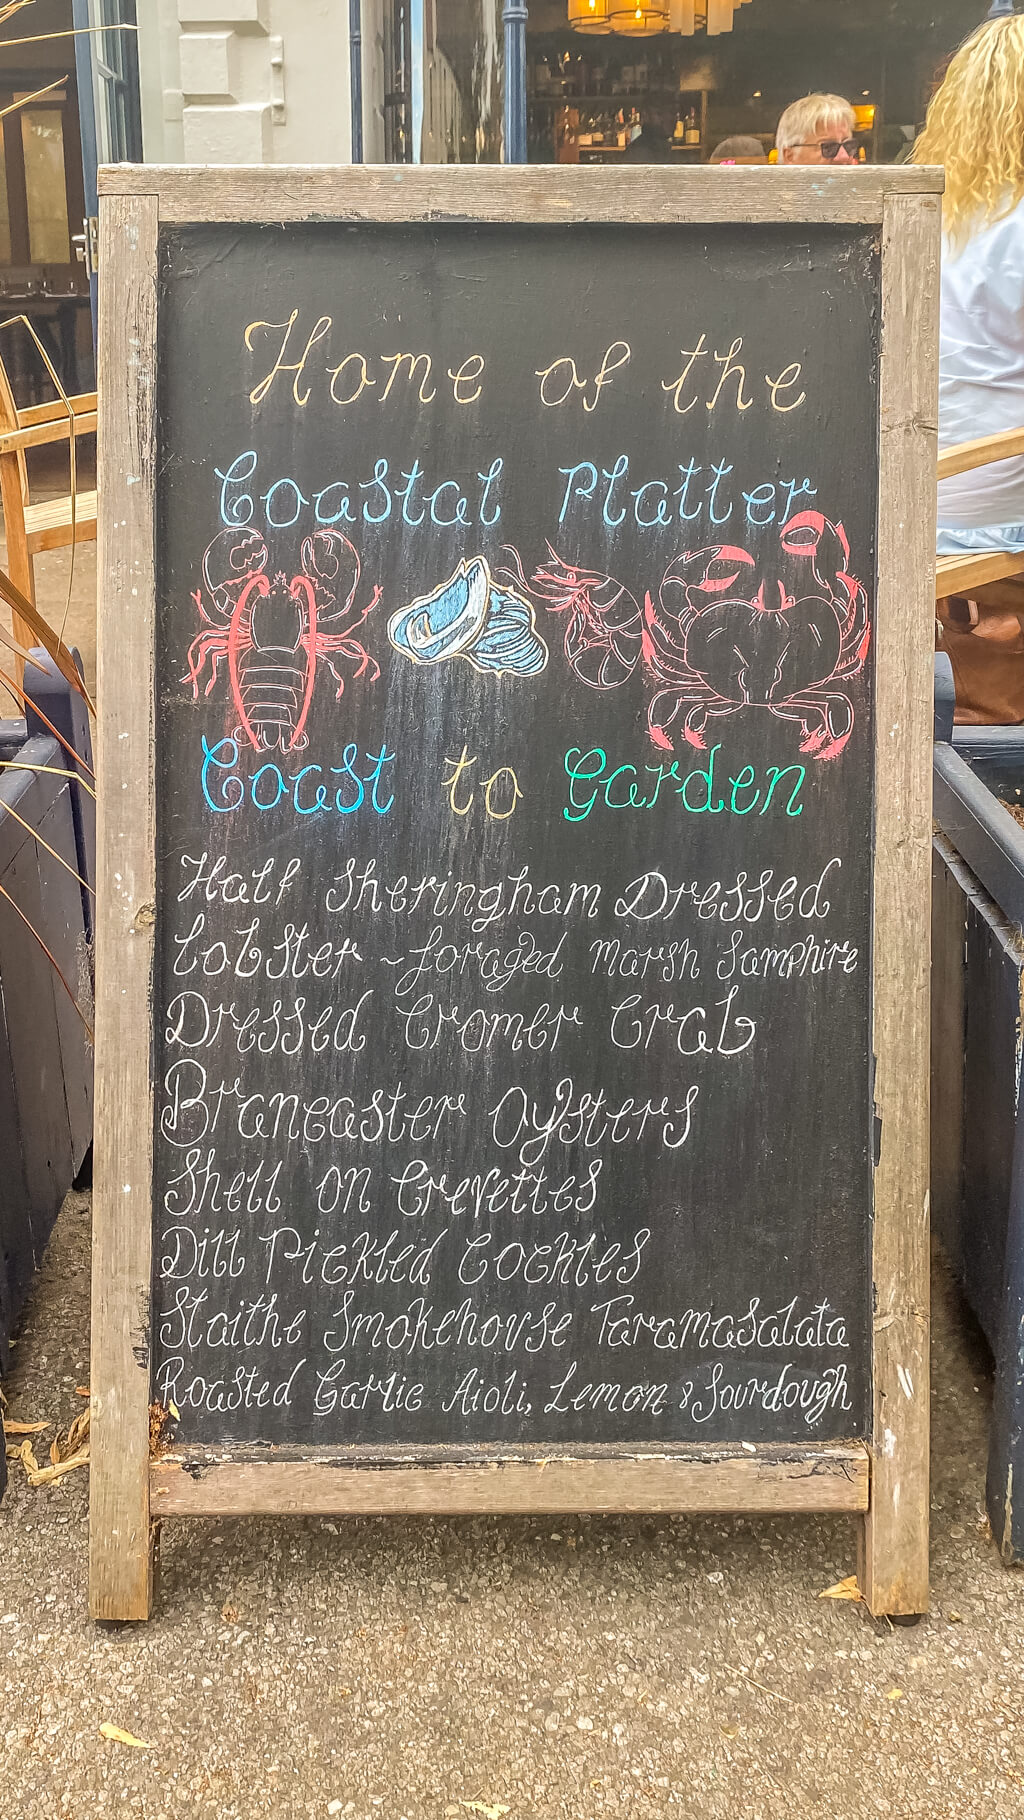 chalk board that list all the items that are pat of the Coastal Platter